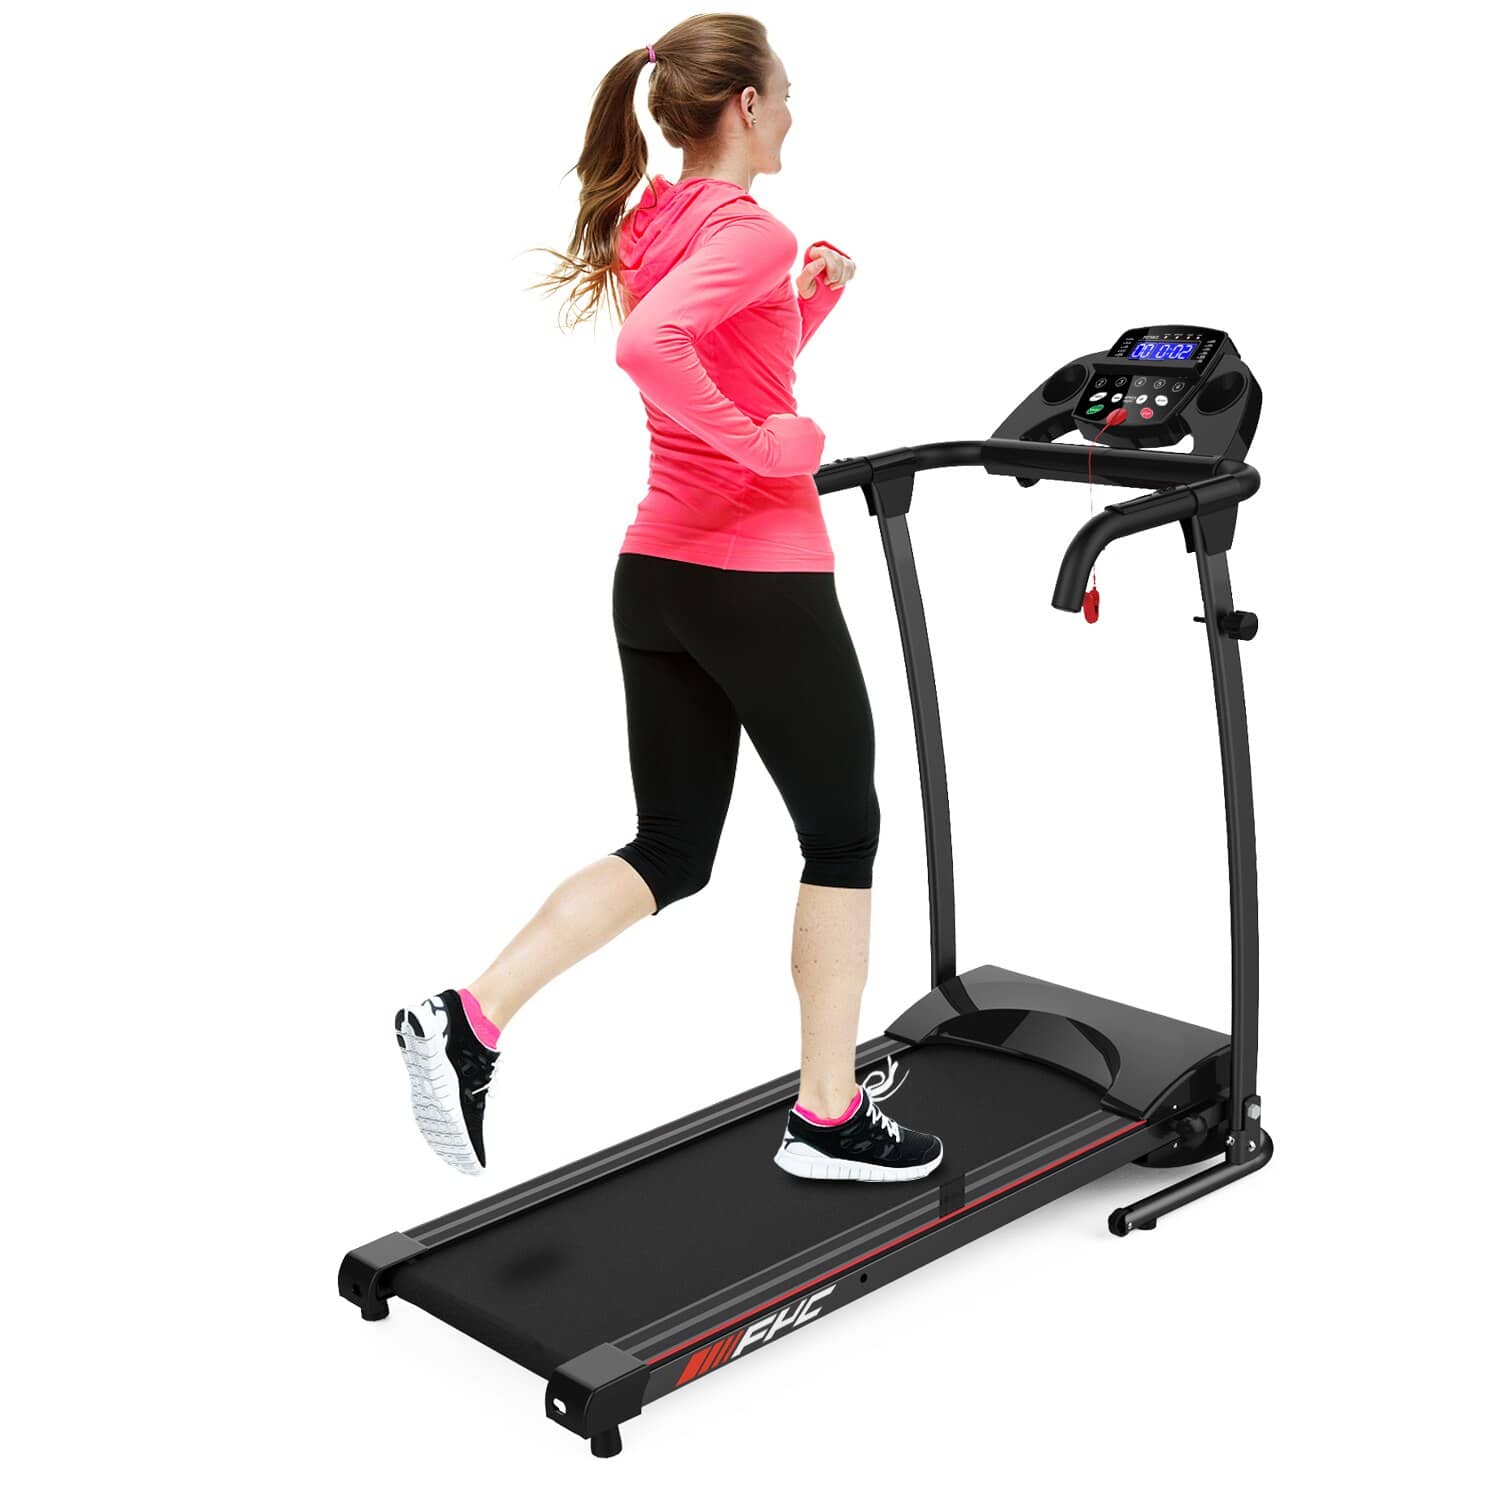 NEW Foldable Treadmil 0.6-6.5mph Run Walk LED Indoor Folding Electric Running Gym Treadmill Exercise Fitness Machine for Home